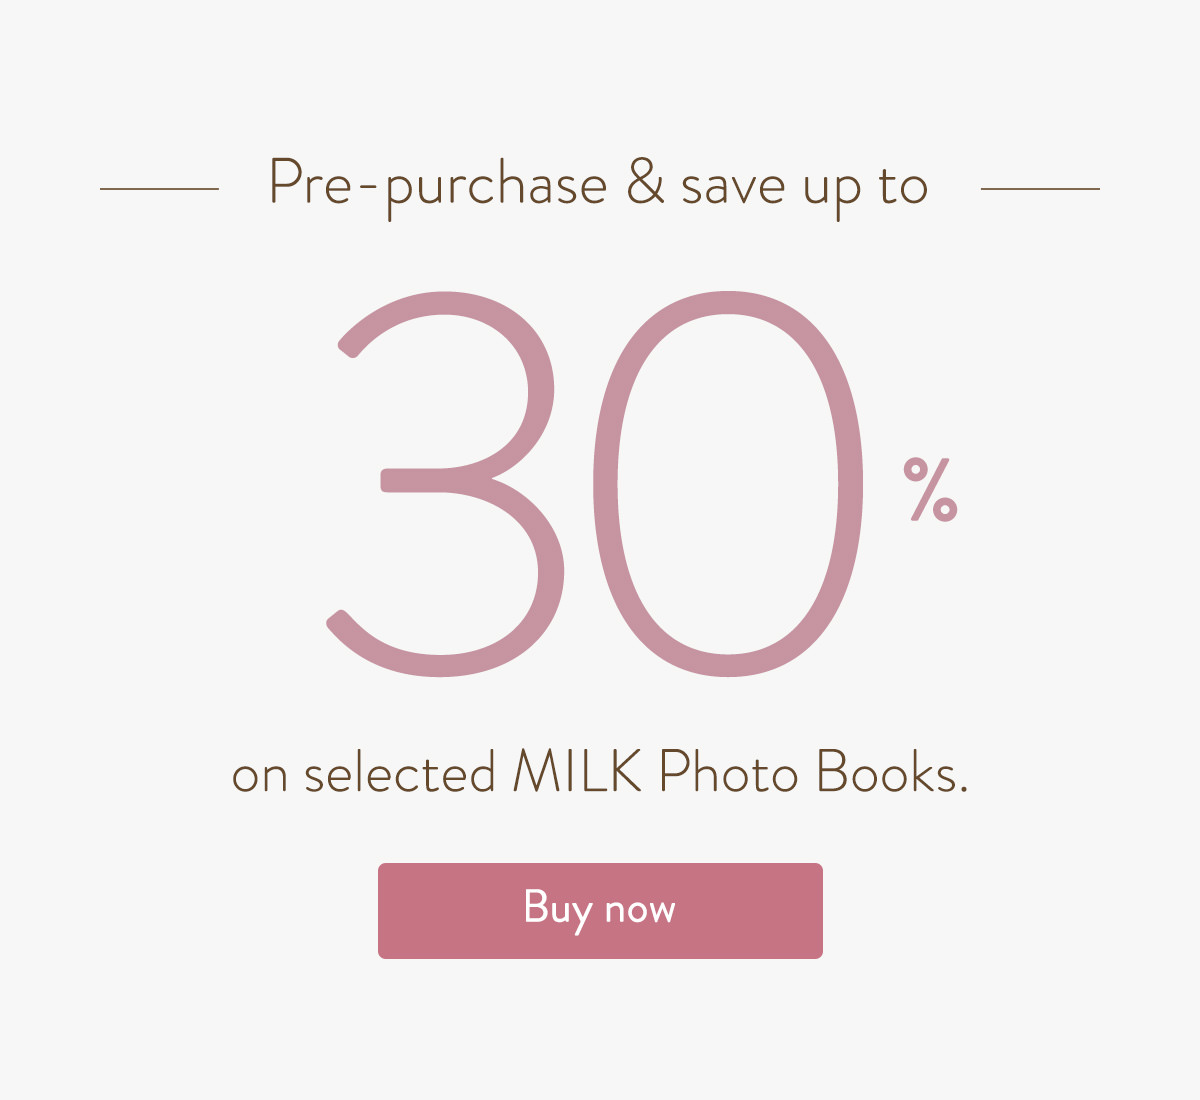 Pre-purchase & save up to 30% on selected MILK Photo Books